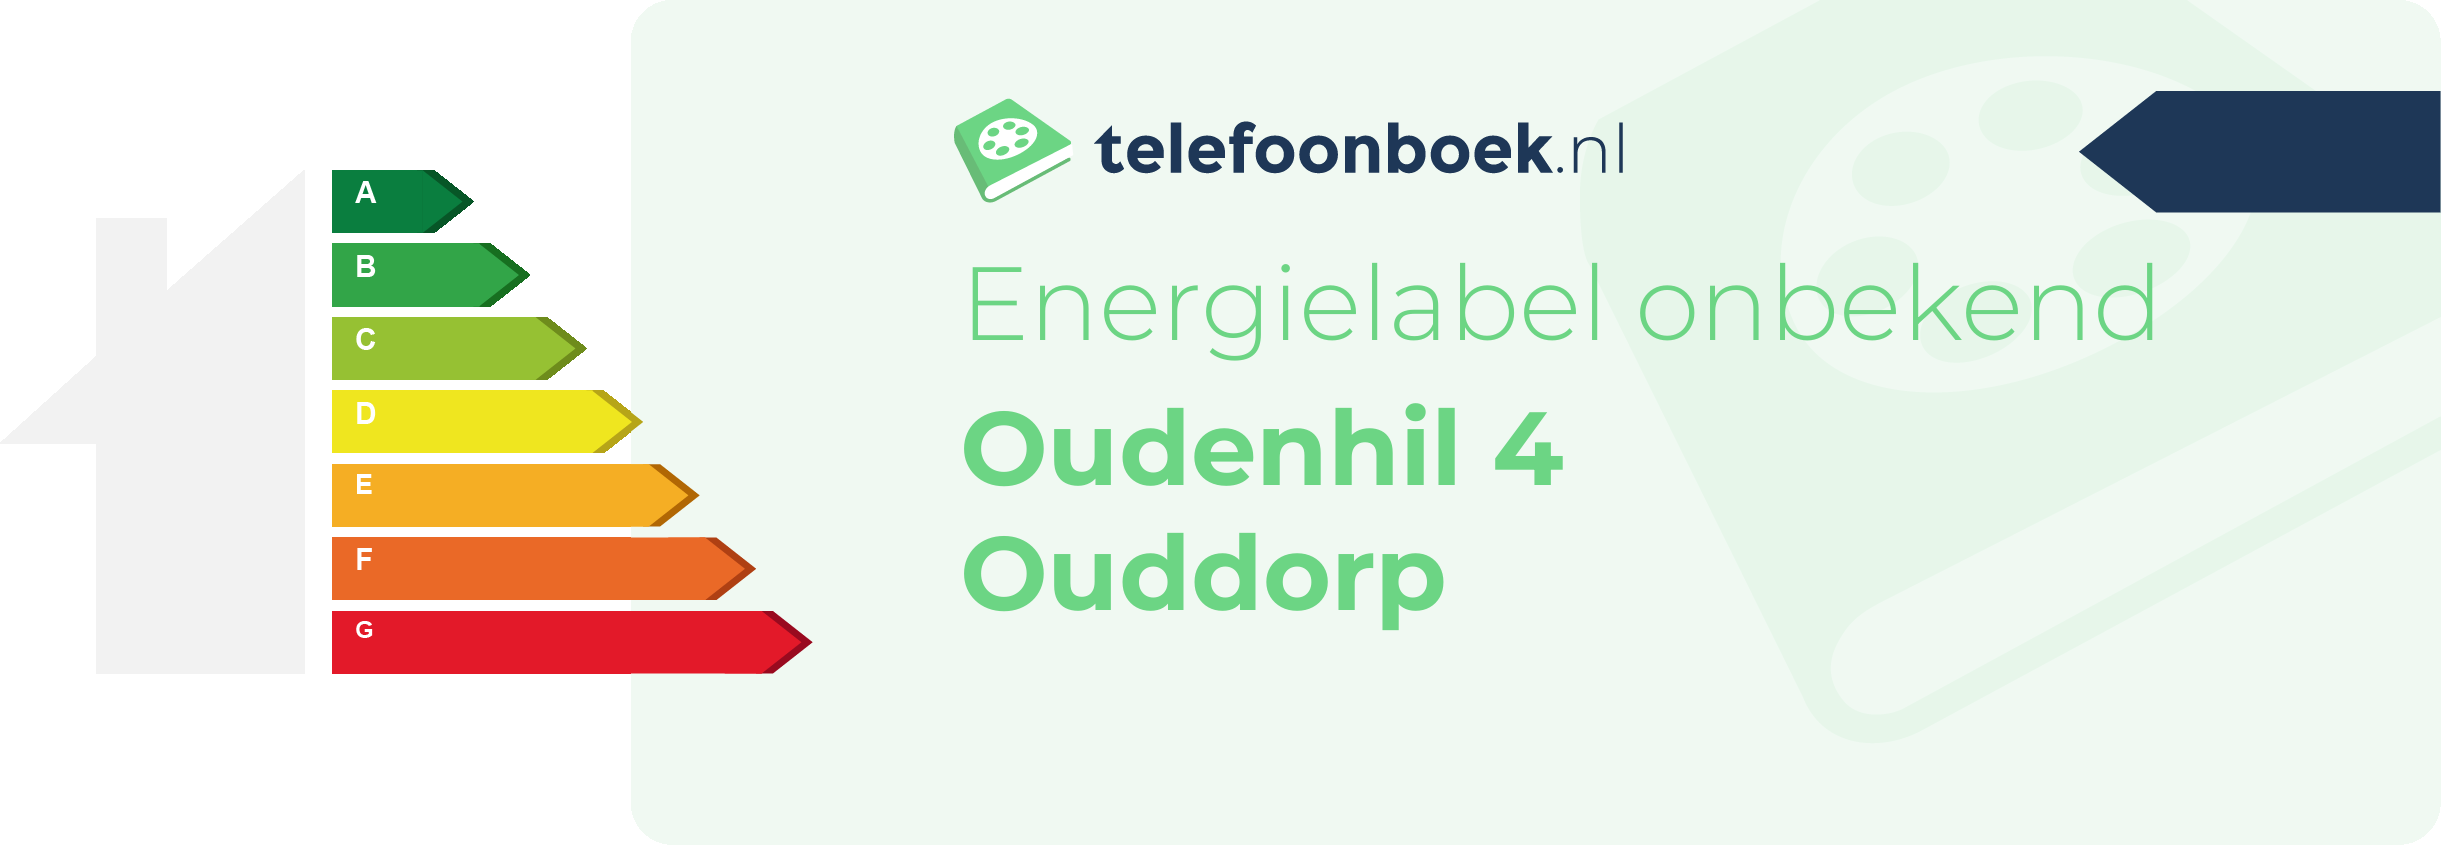 Energielabel Oudenhil 4 Ouddorp